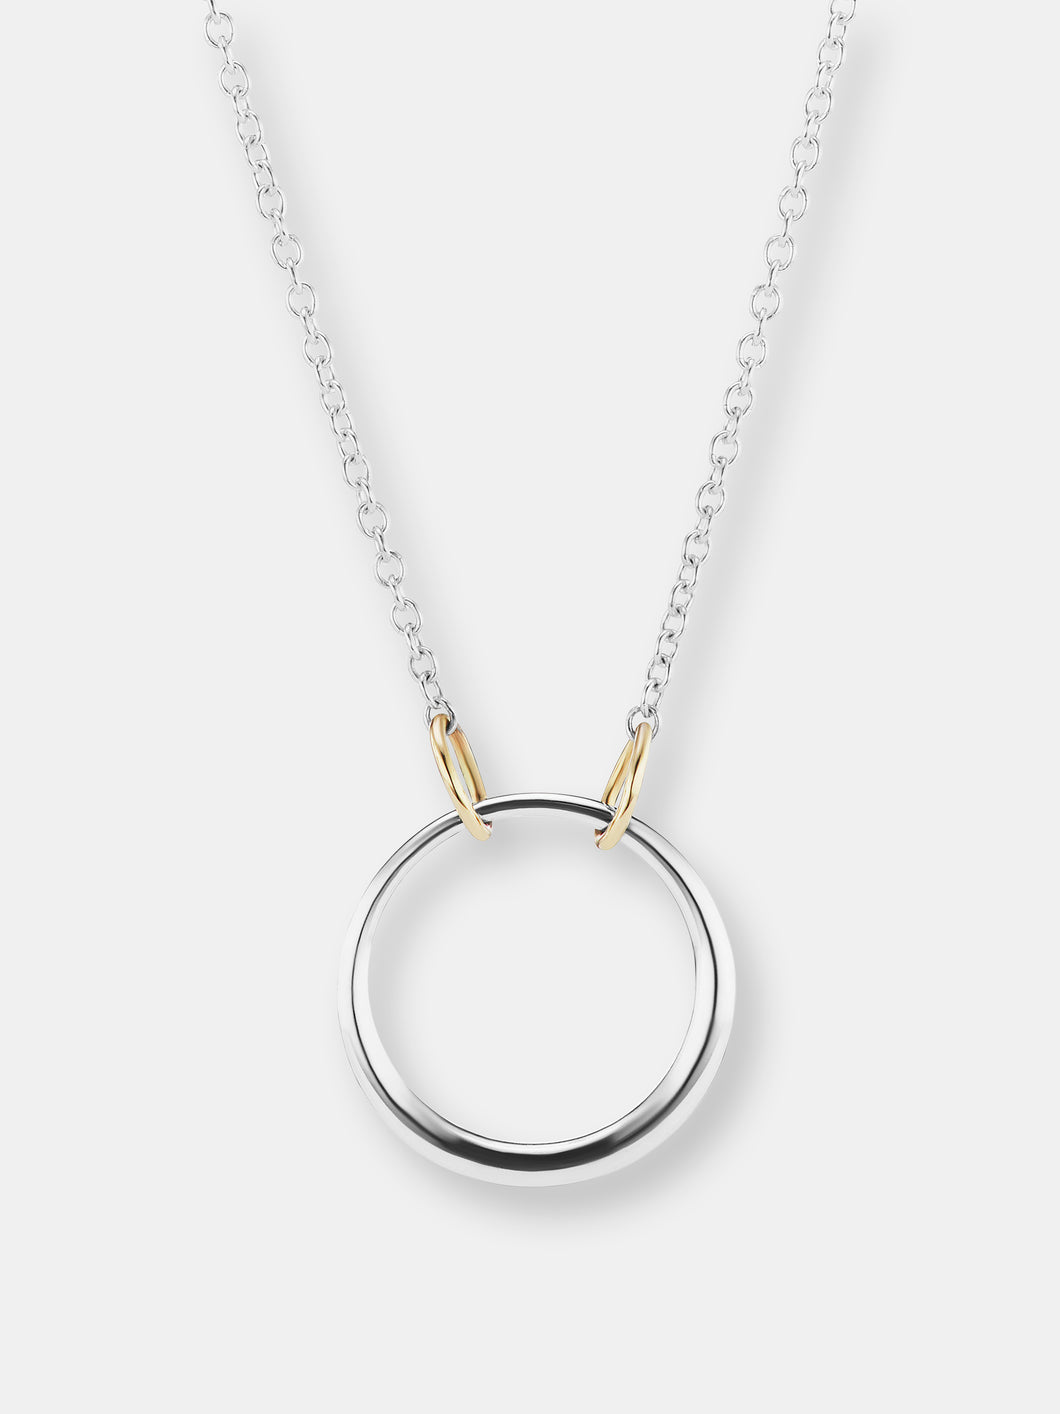 The Silver Petite Loop Necklace